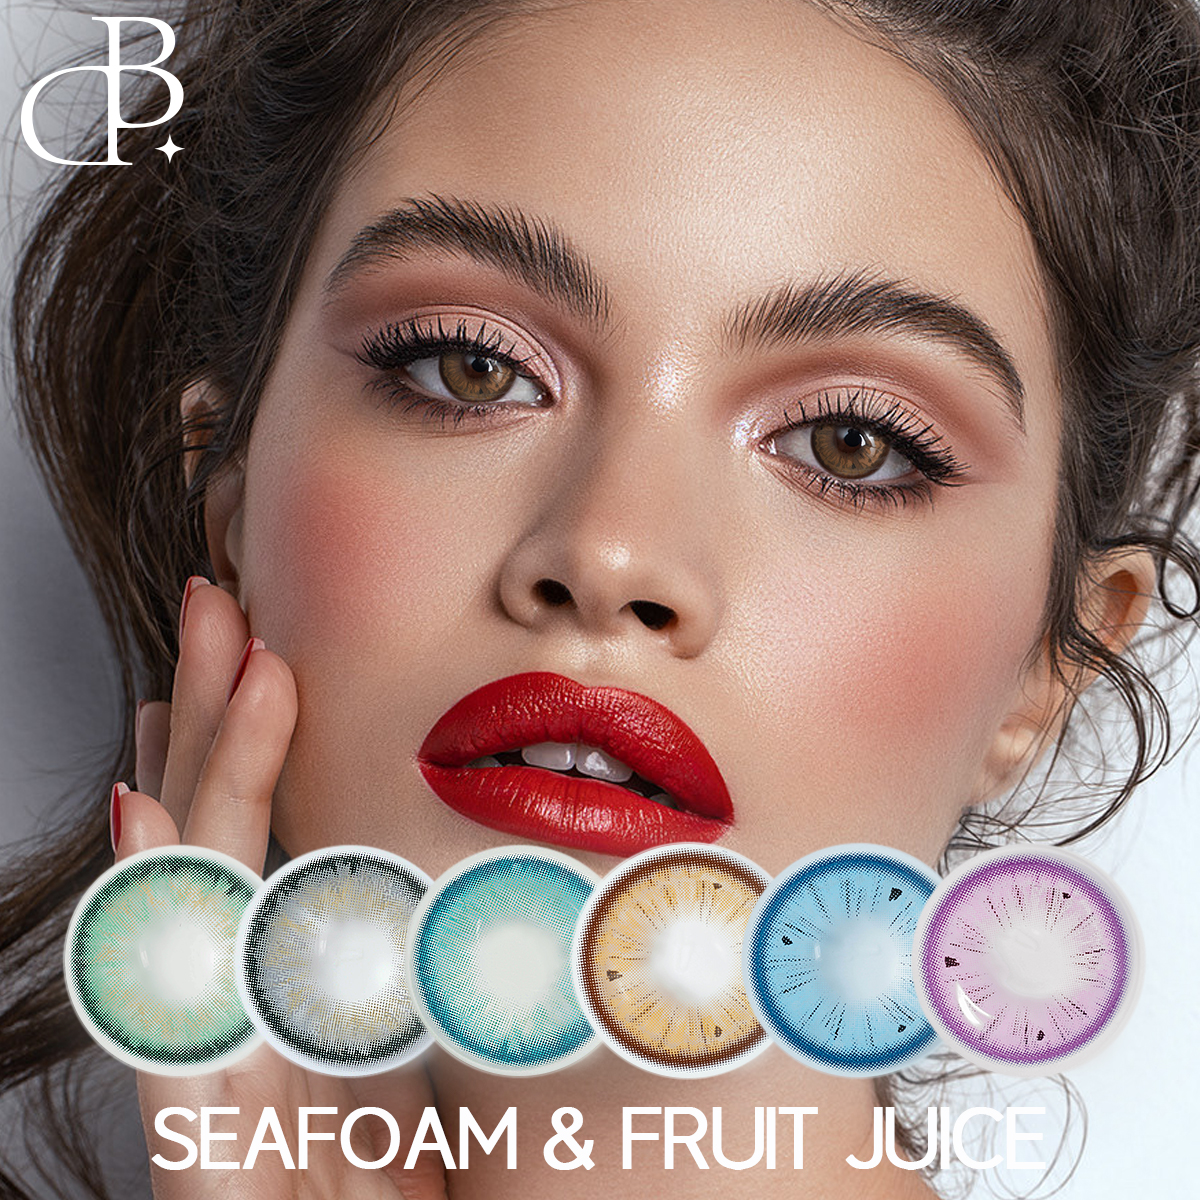 SEAFOAM & FRUCTUS JUICE Oem/Odm contacto New Style Natural Eyes Colored Lens Cosmetic Eyes Lens Color Contactus Lentes